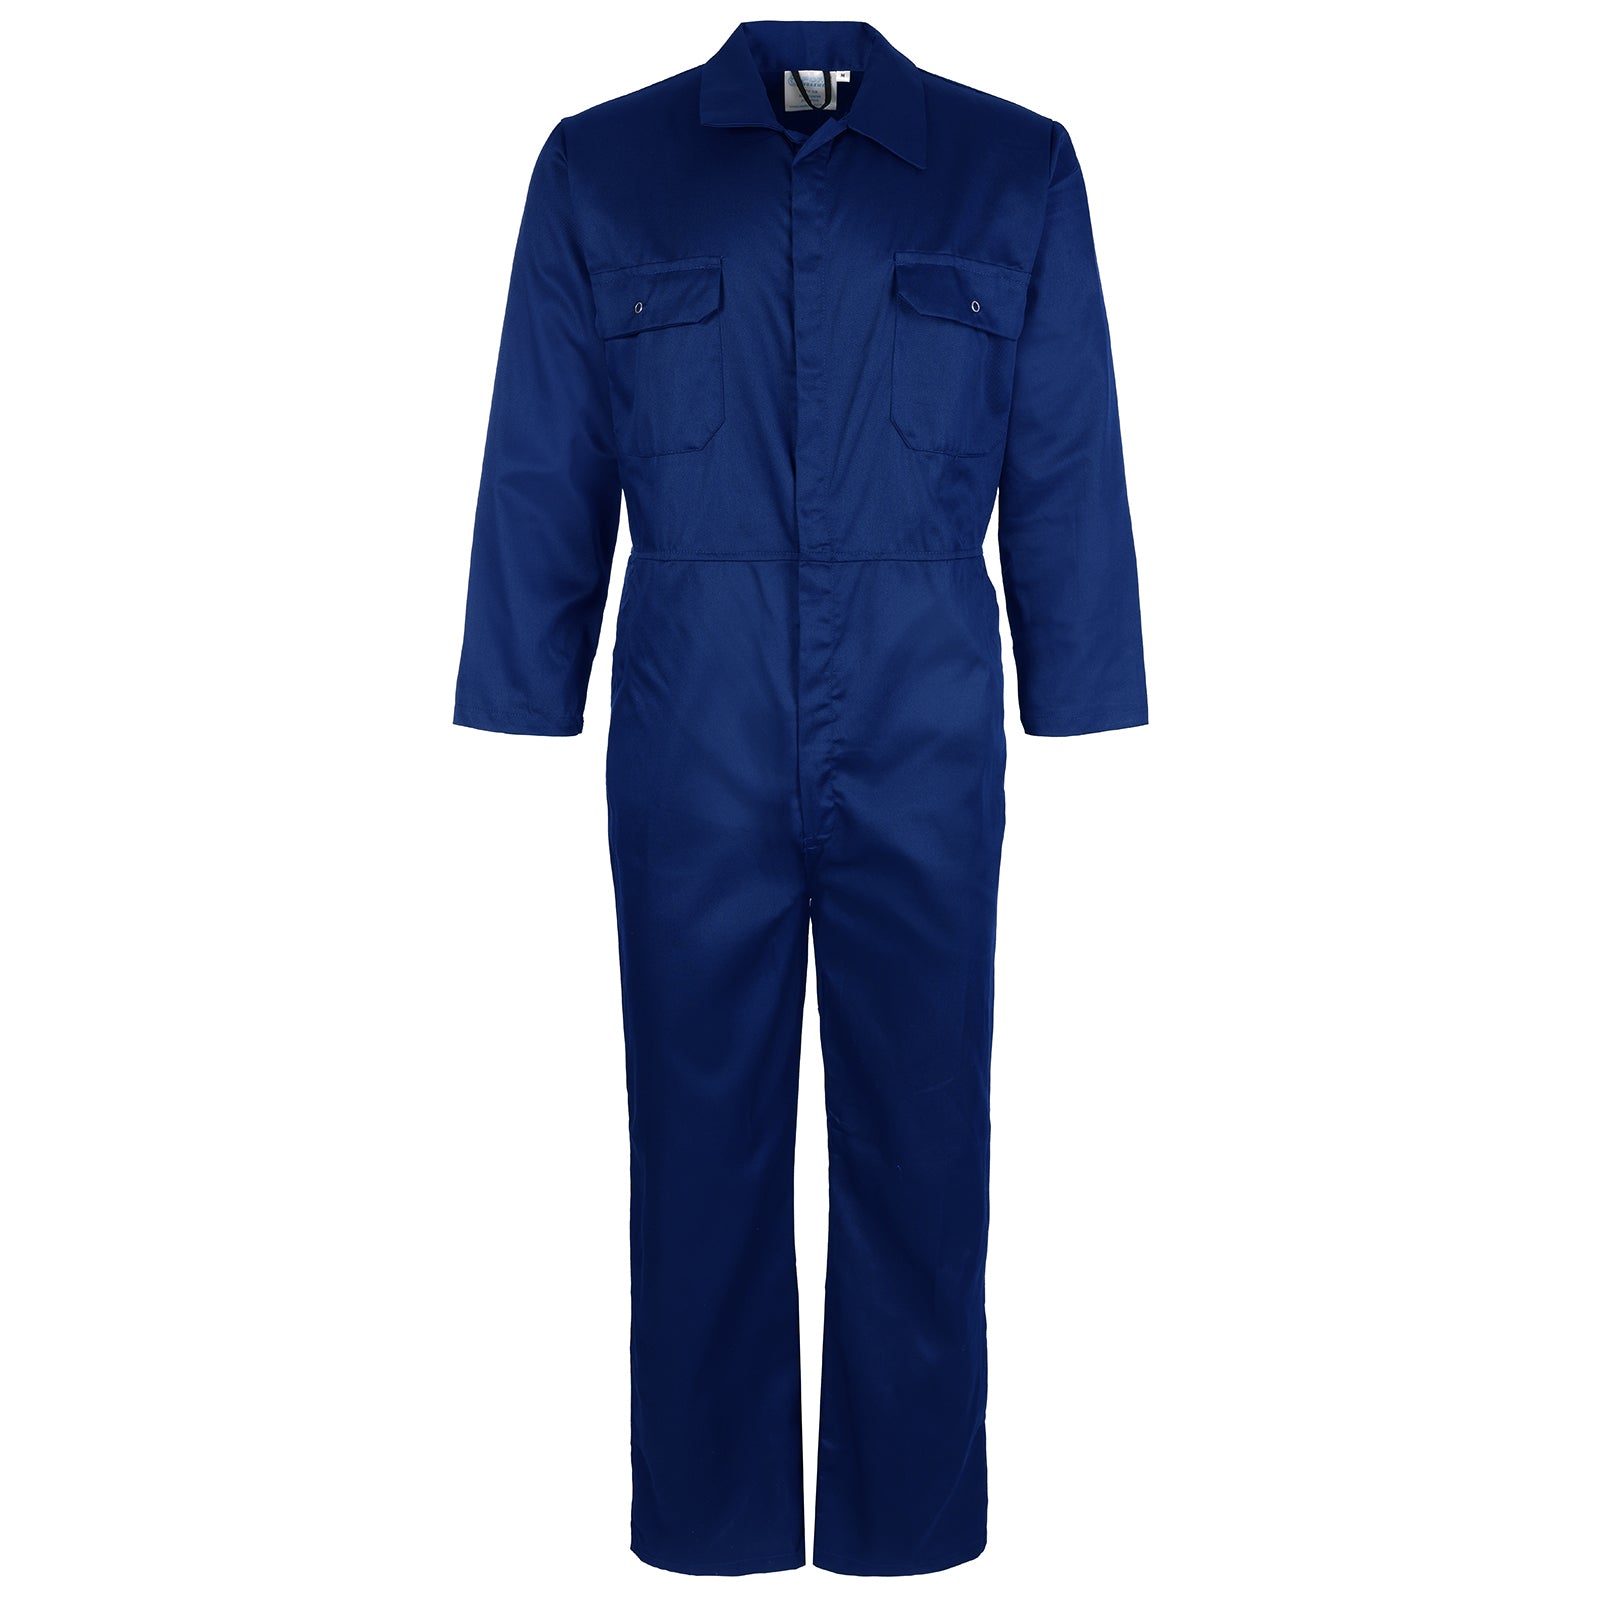 FORT WORKFORCE COVERALL (318)